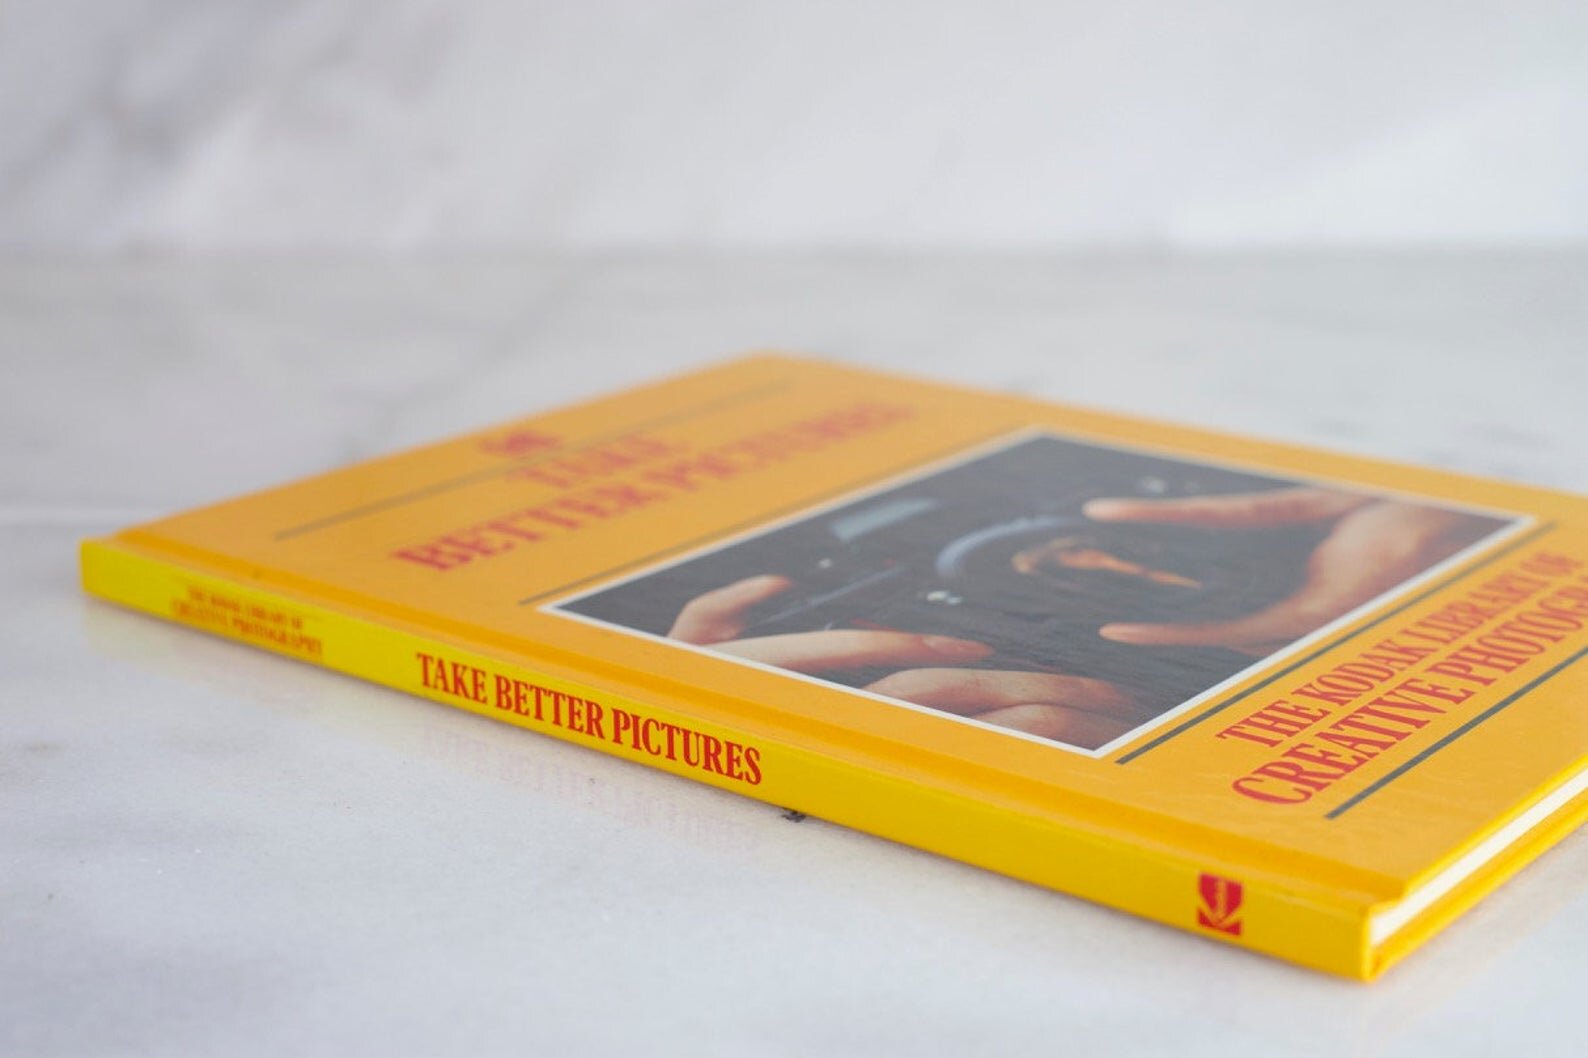 Take Better Pictures Kodak Library of Creative Photography Hardcover 104 Pages 1983